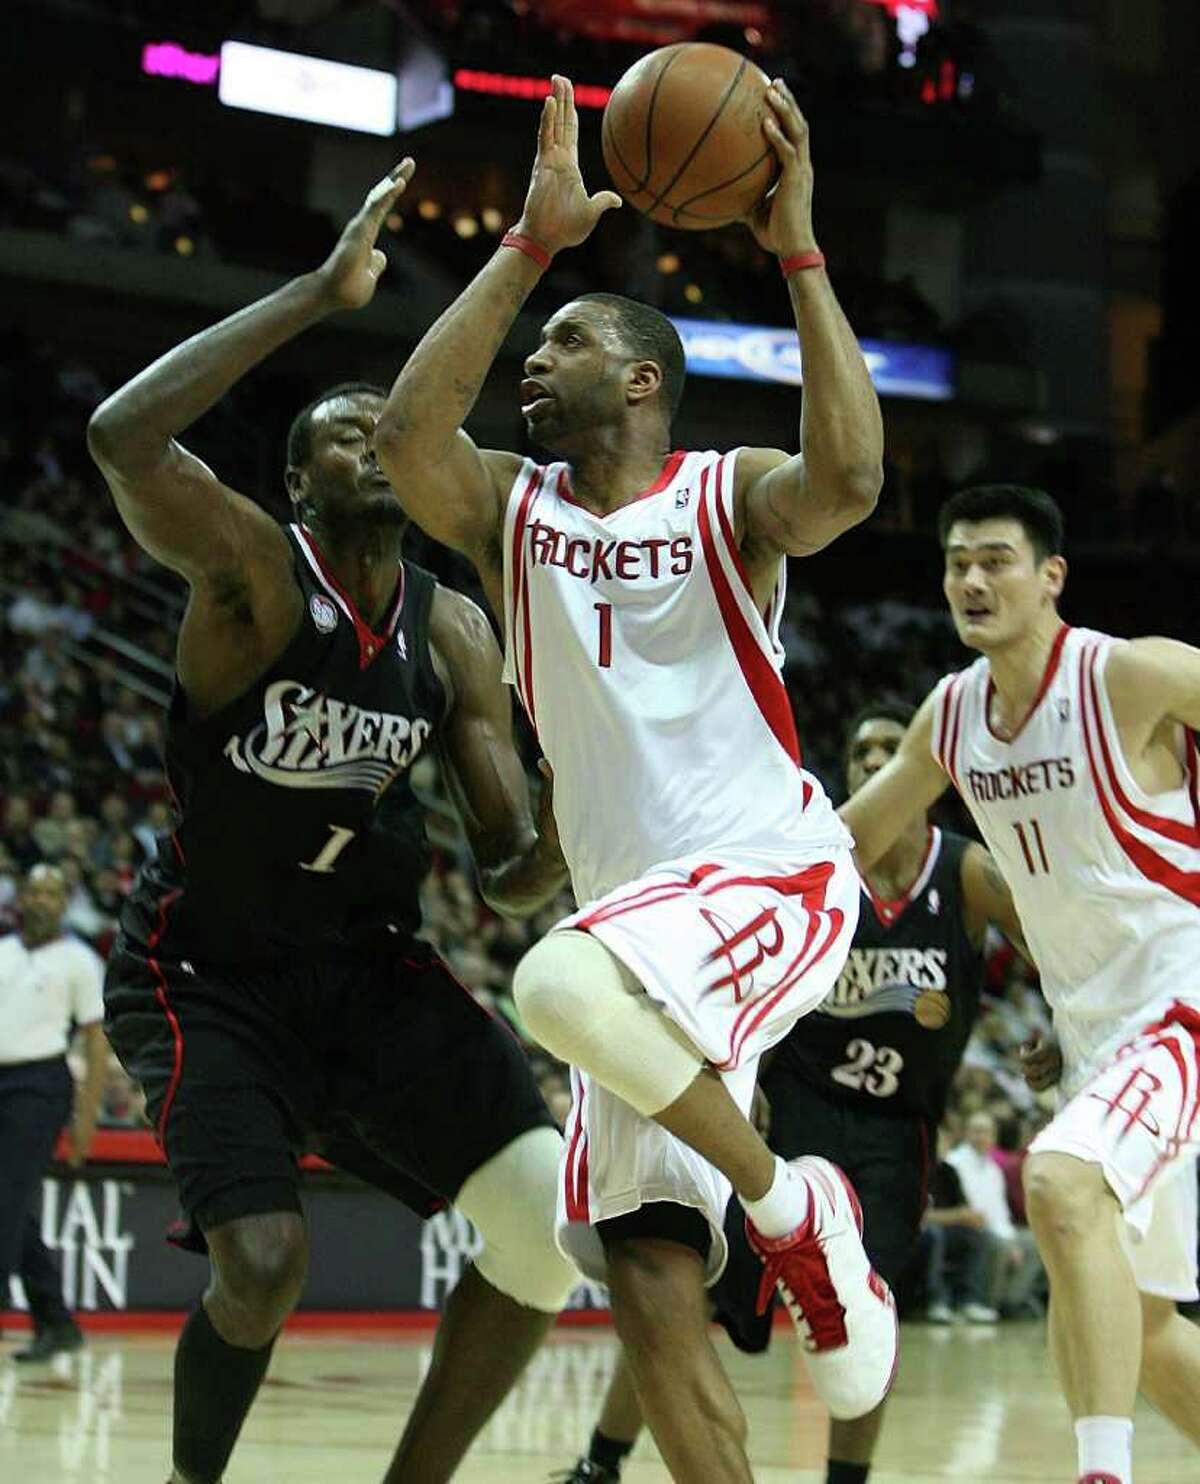 (l-r) Philadelphia 76ers (1) Samuel Dalembert attempts to defend Houston Rockets forward (1) Tracy McGrady as he drives to the basket during the first half of the Houston Rockets match up with the Philadelphia 76ers at the Toyota Center Wednesday, Jan. 28, 2009, in Houston. (Billy Smith II / Chronicle )